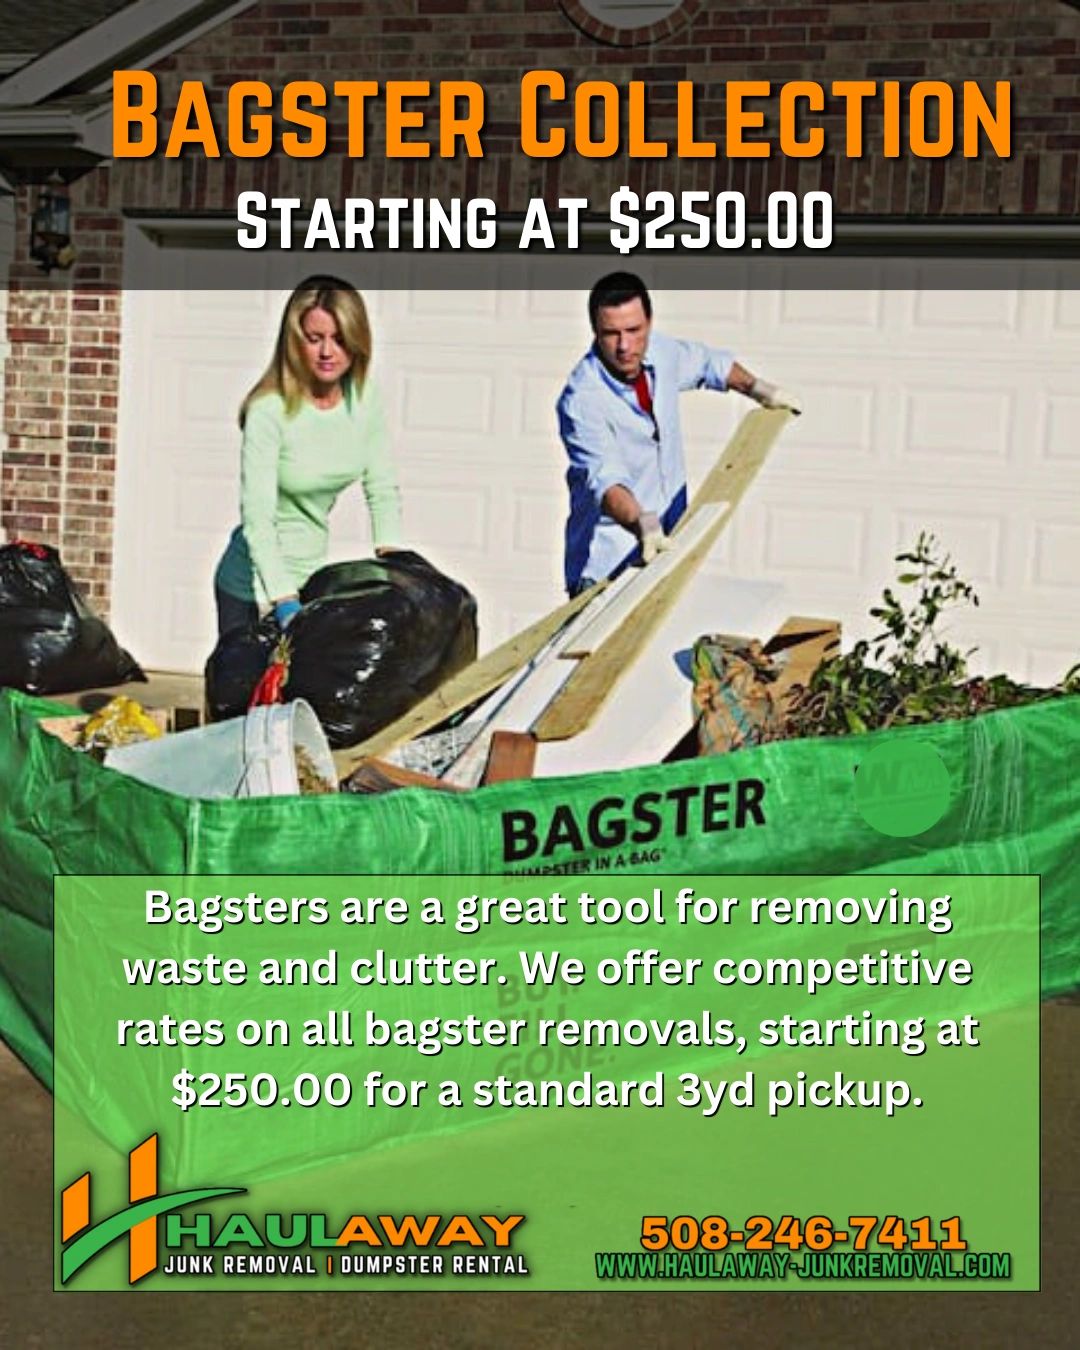 Dumpster Bags vs Dumpster Rentals - Which is Best?